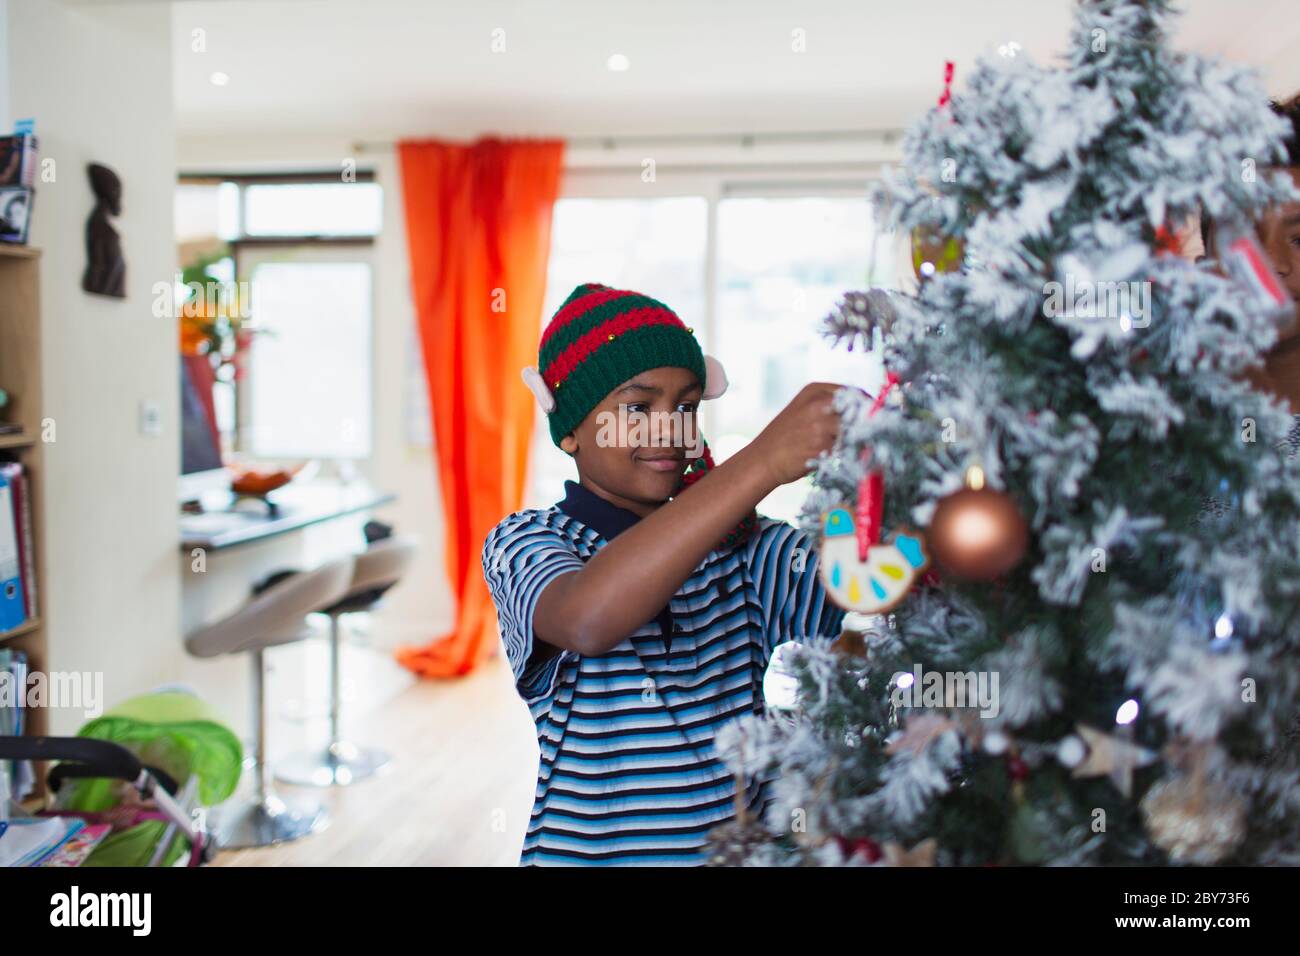 Boy decorating Christmas tree in living room Stock Photo